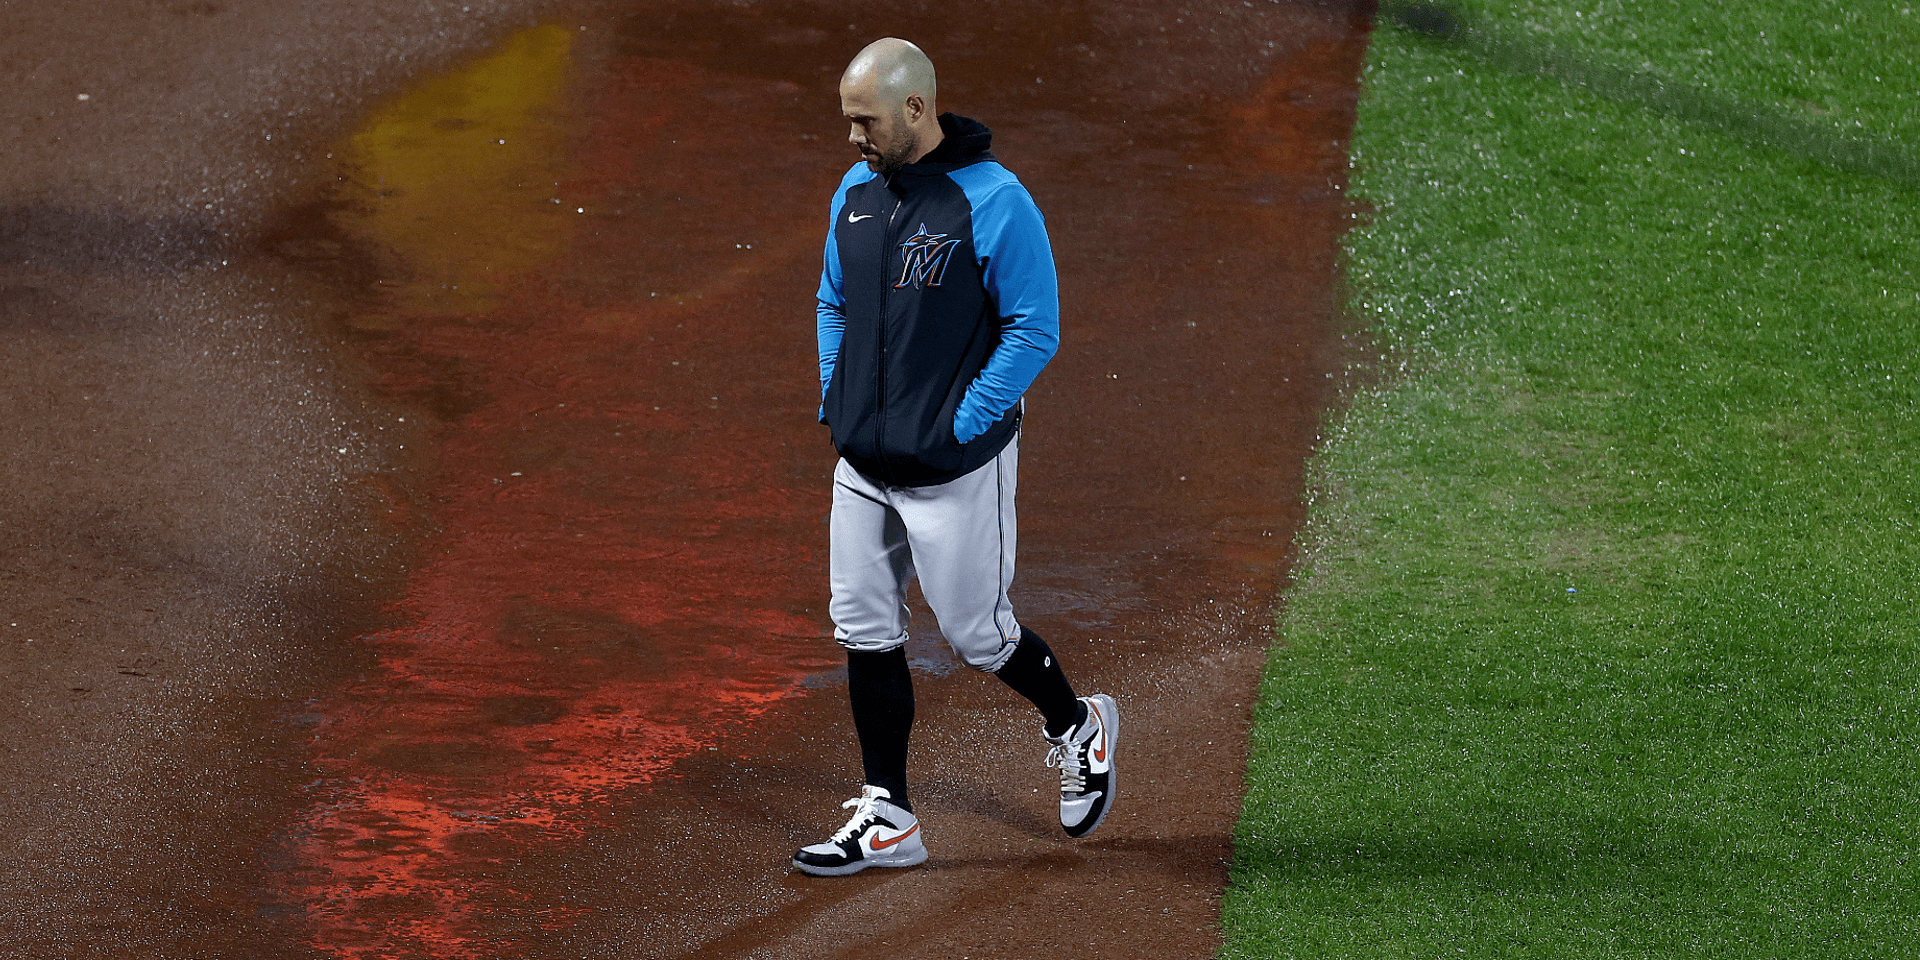 Marlins-Mets game suspended: What rainout means for Miami's schedule, playoff scenarios